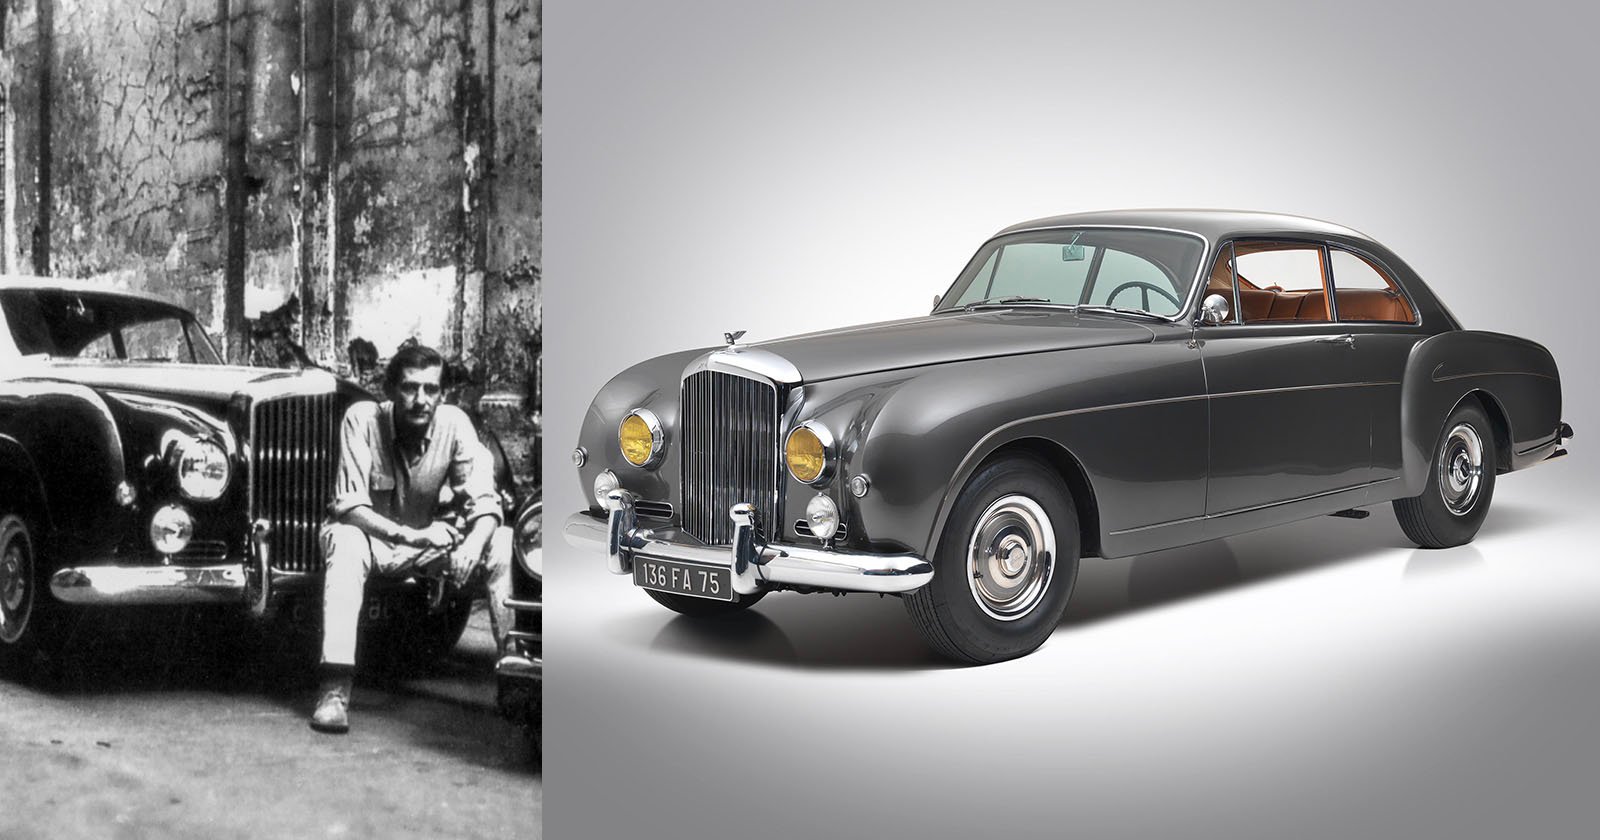 Helmut Newtons 1956 Bentley Up for Sale, Comes with a Giant Photo Book